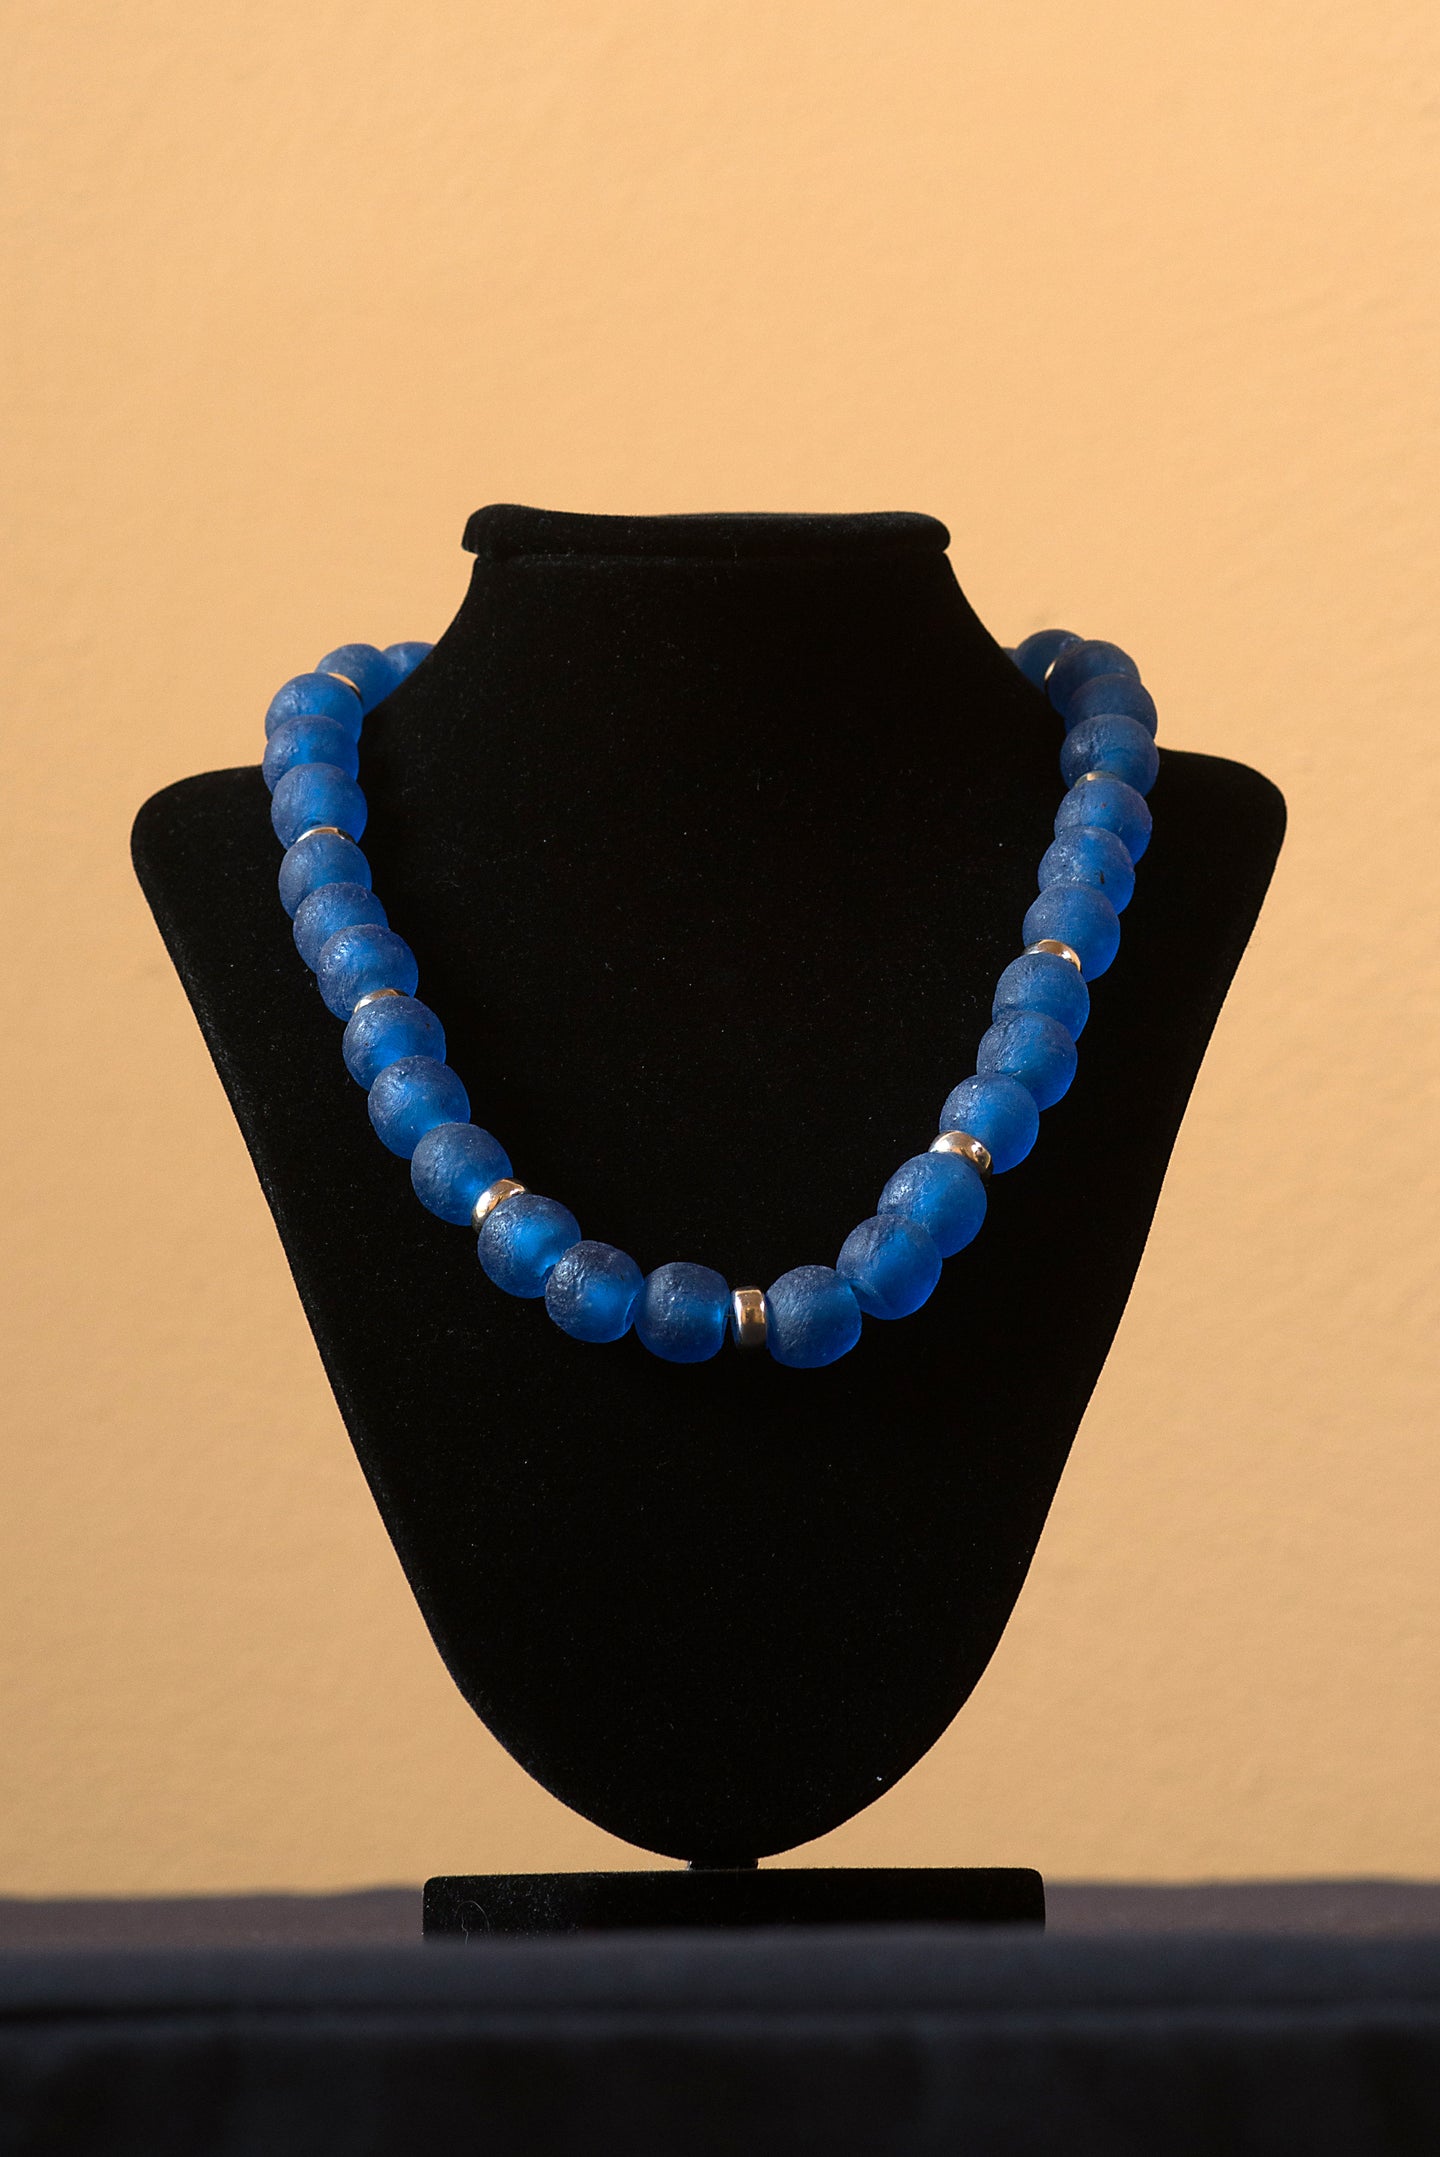 Necklace - Blue Recycled Glass, Sterling Silver Rondelles